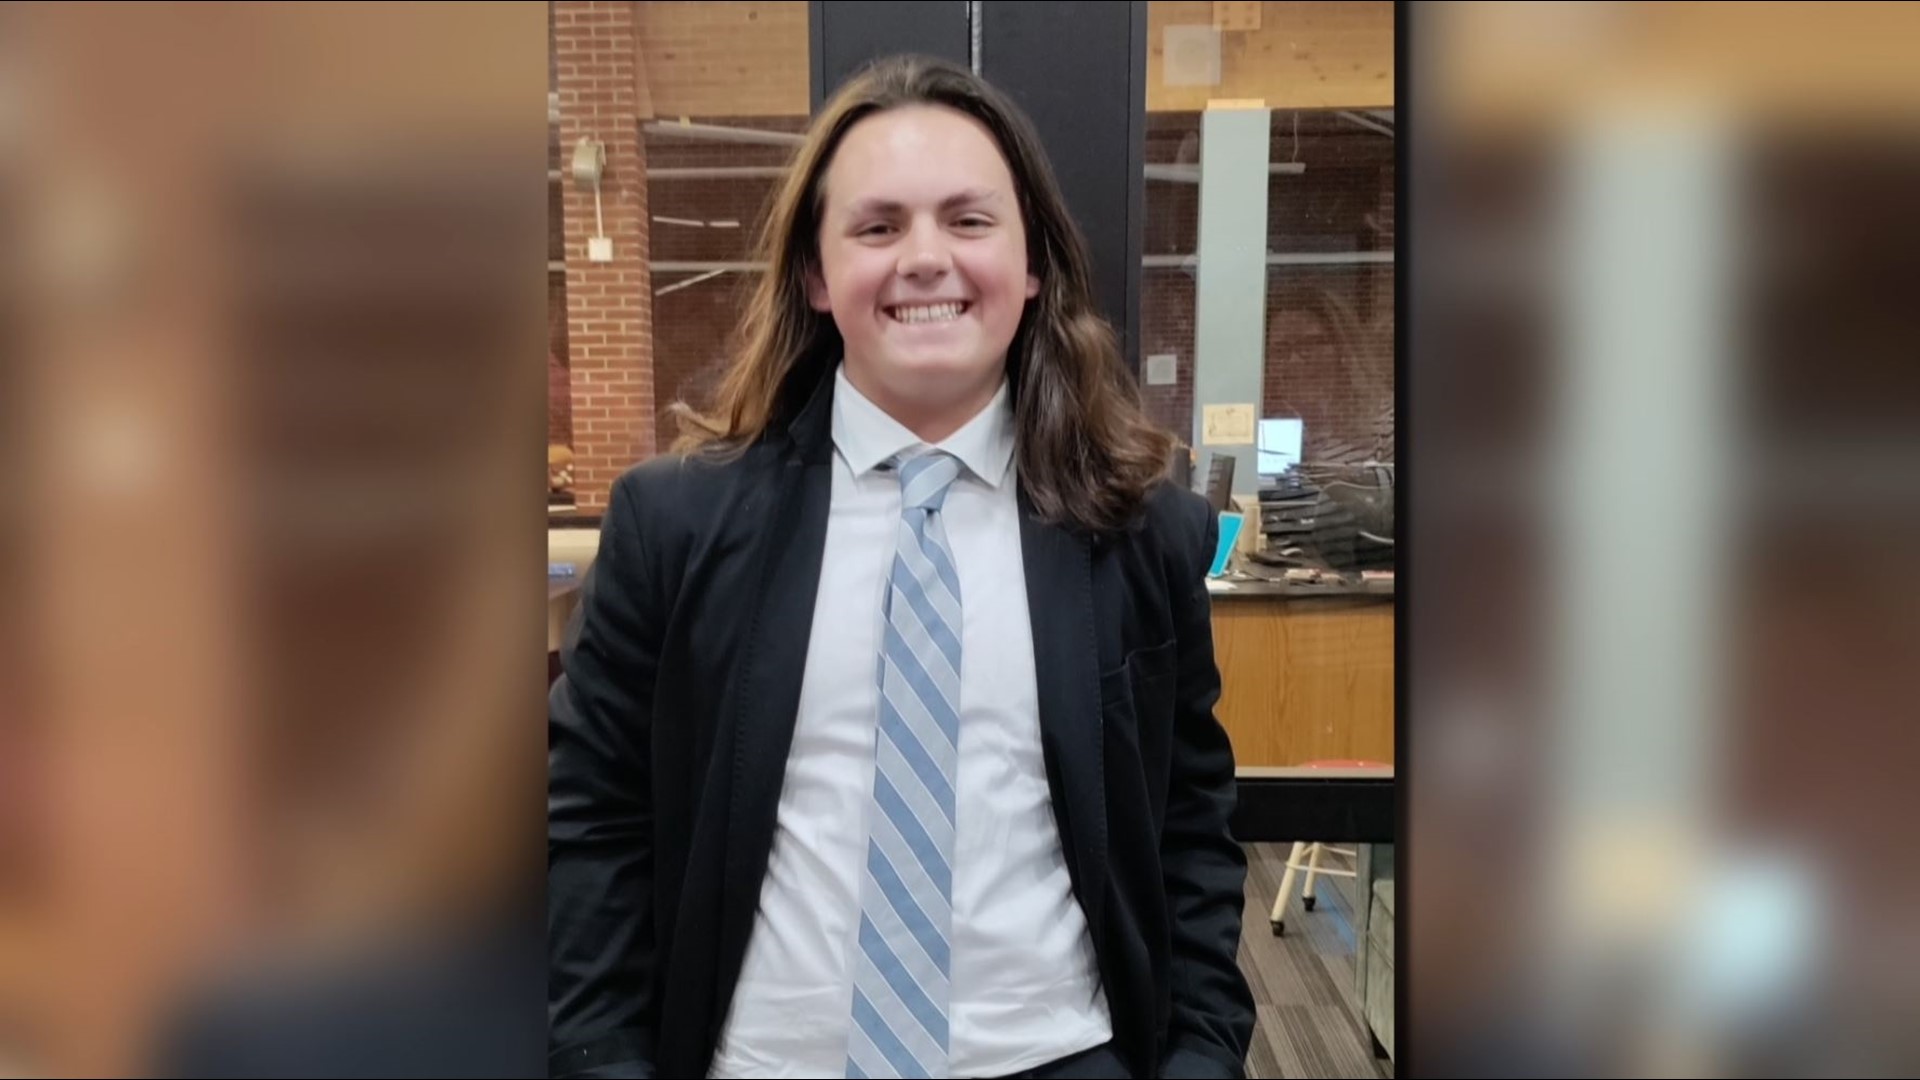 Family members of 15-year-old Jase Emily said they are taking legal action against Greater Clark Schools and the sheriff's office after he was arrested in May.